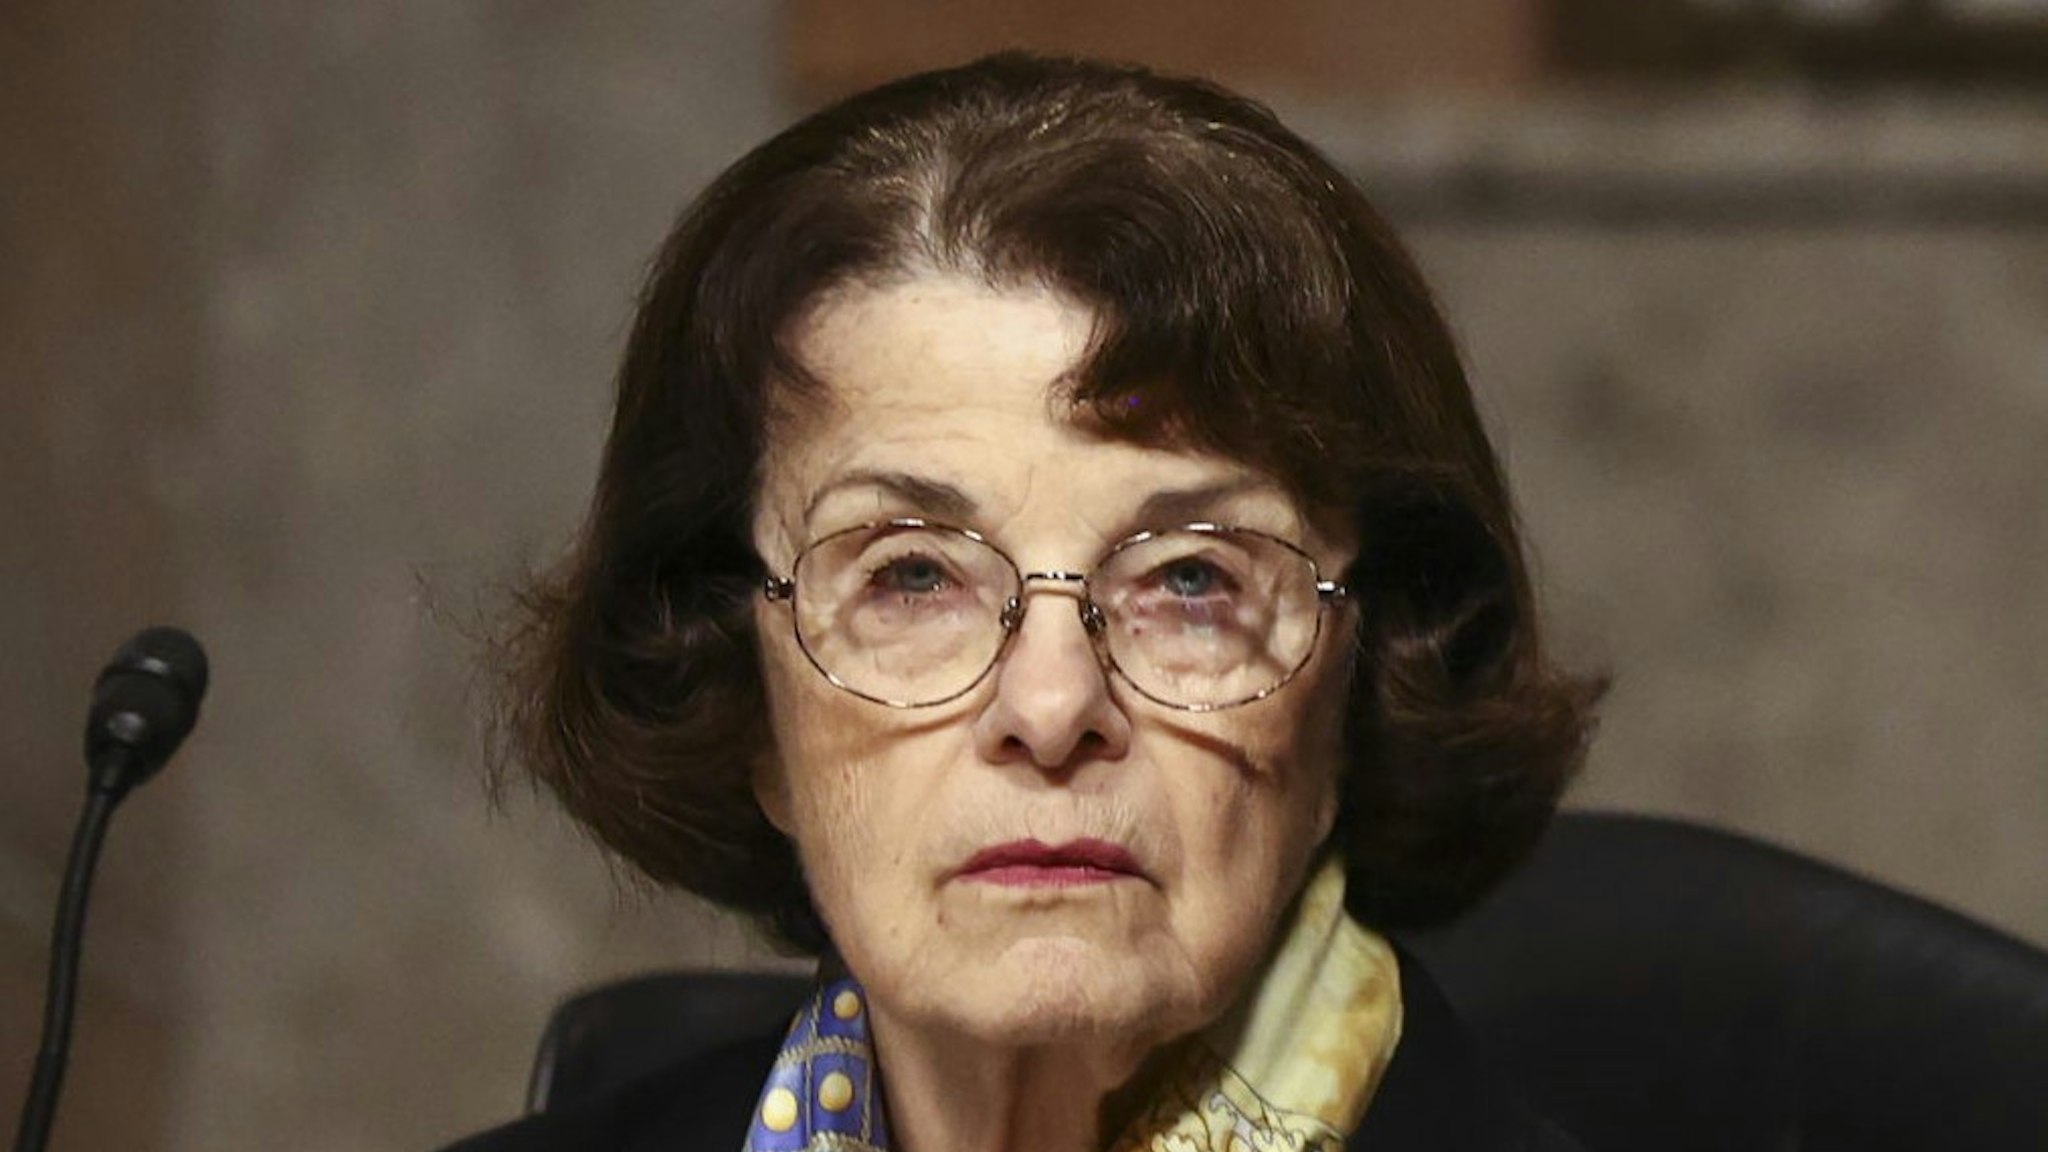 Senator Dianne Feinstein, a Democrat from California and ranking member of the Senate Judiciary Committee, listens during a hearing in Washington, D.C., U.S., on Tuesday, Nov. 18, 2020. Zuckerberg and Dorsey will be forced to defend themselves from accusations by Republican senators that their labeling of President Donald Trump's social-media posts claiming voter fraud as false or misleading amounts to censorship of conservative content. Photographer: